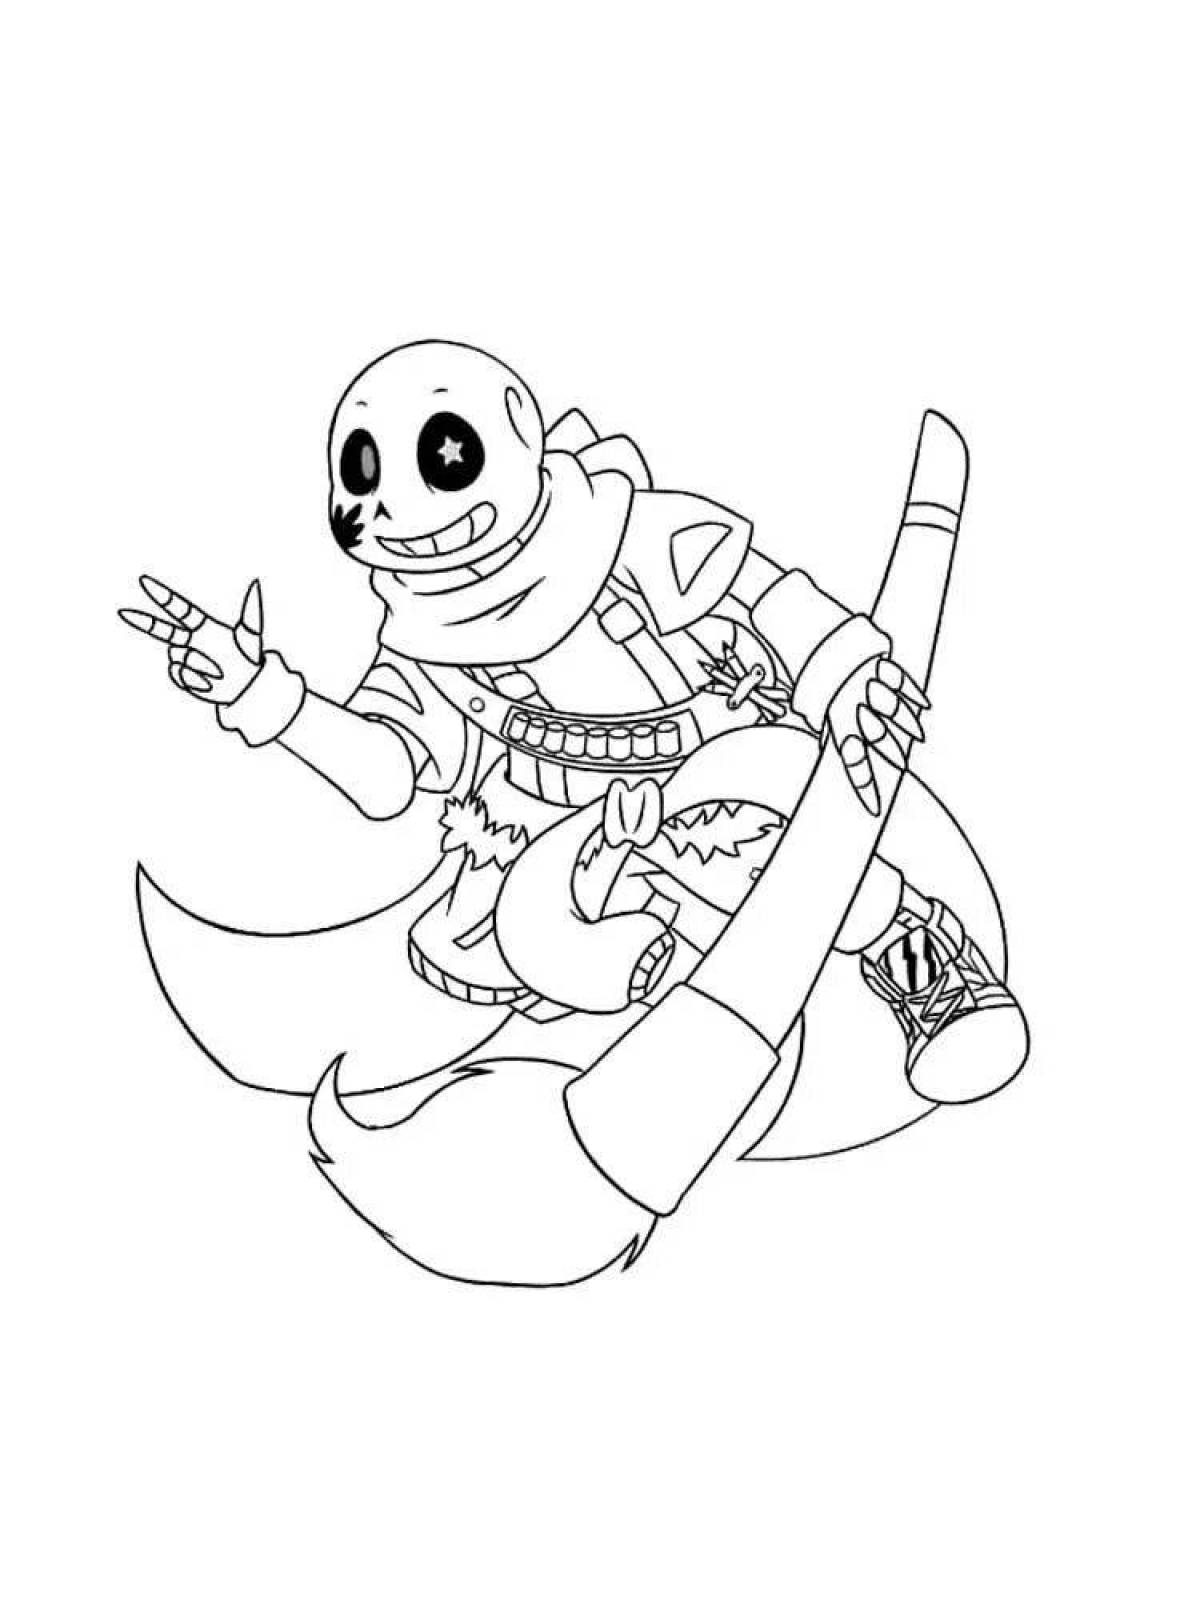 Radiant undertale coloring book